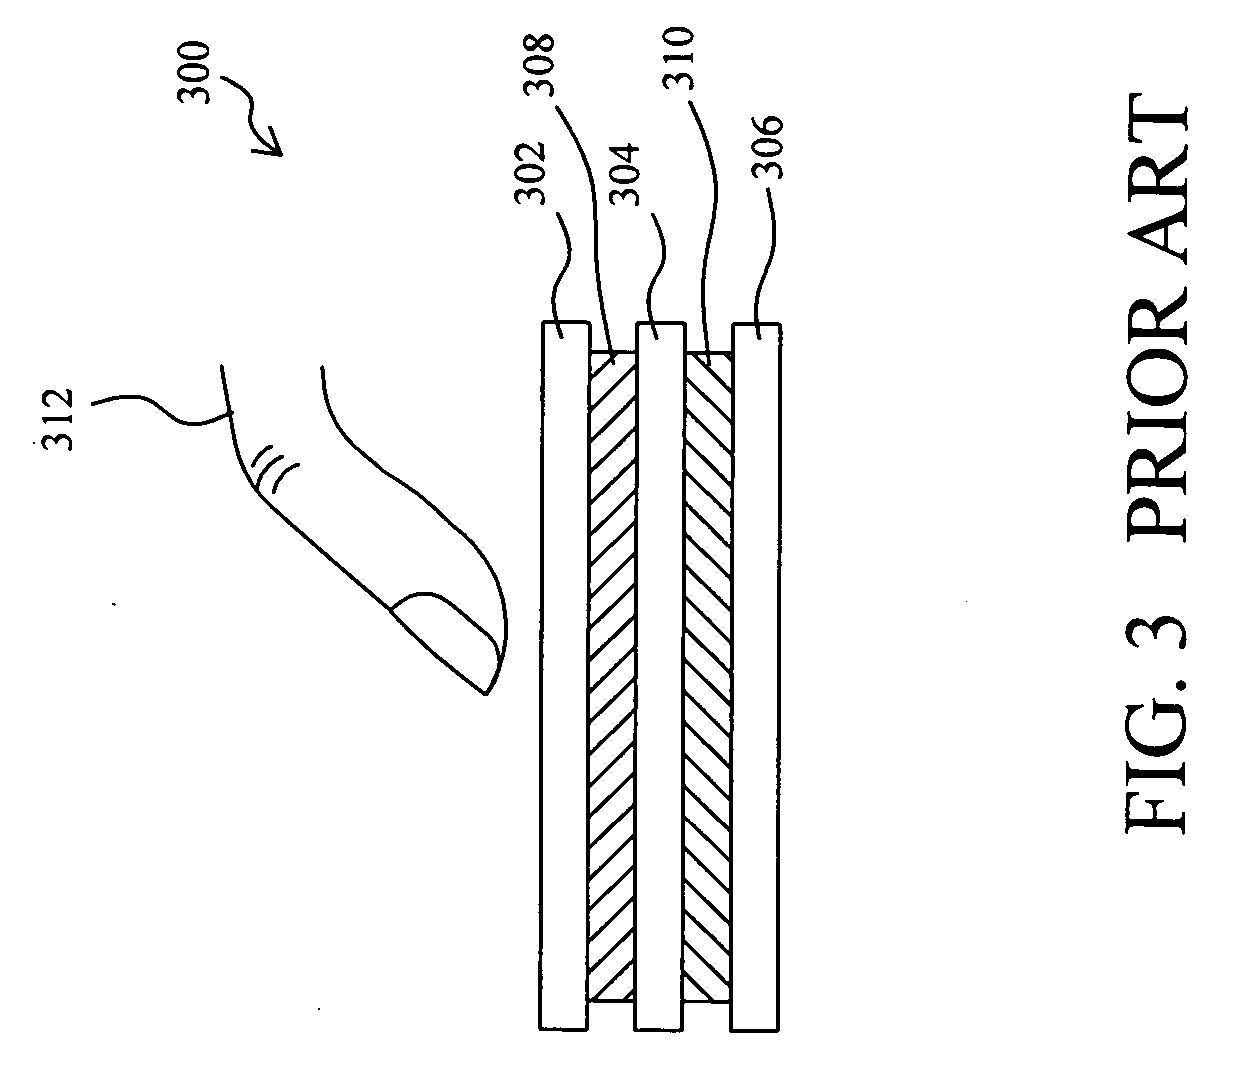 Capacitive touchpad with physical key function